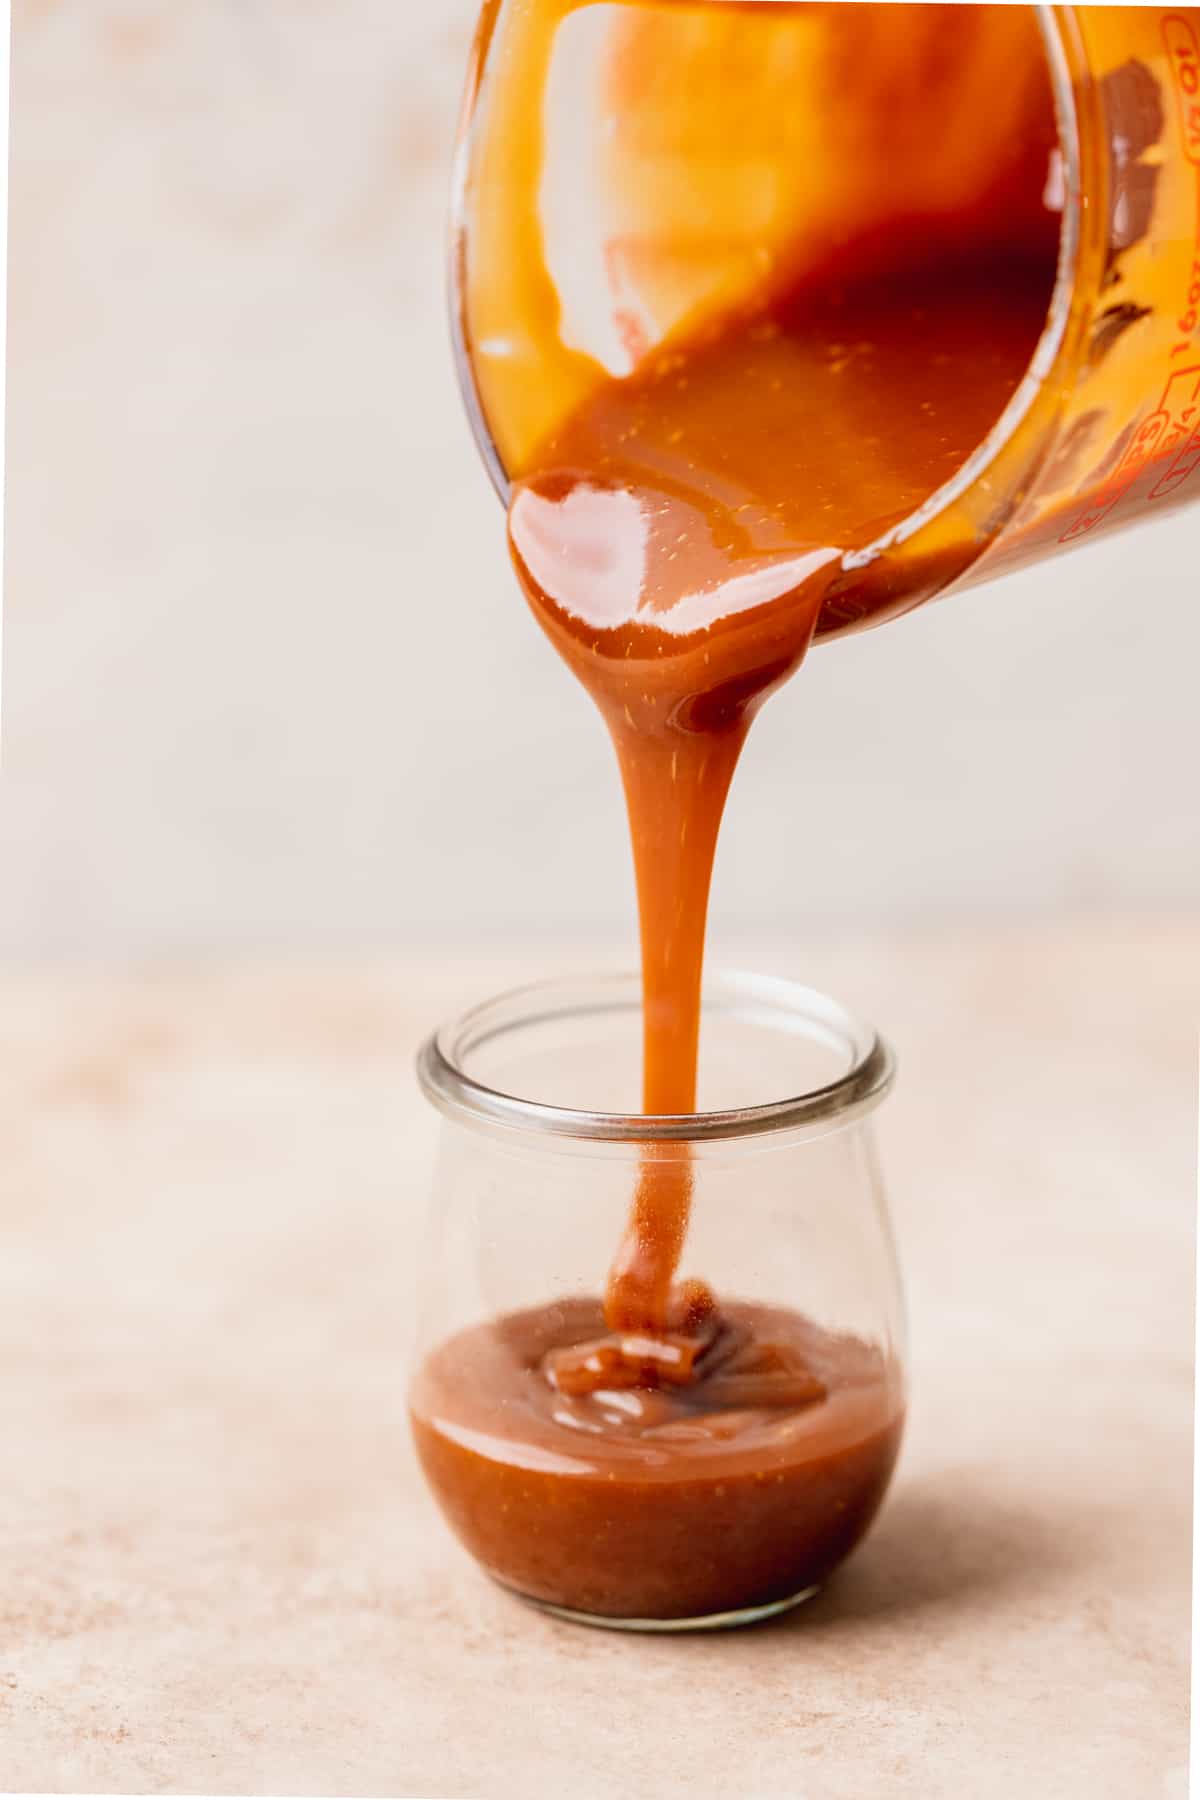 Pouring caramel in a glass jar.